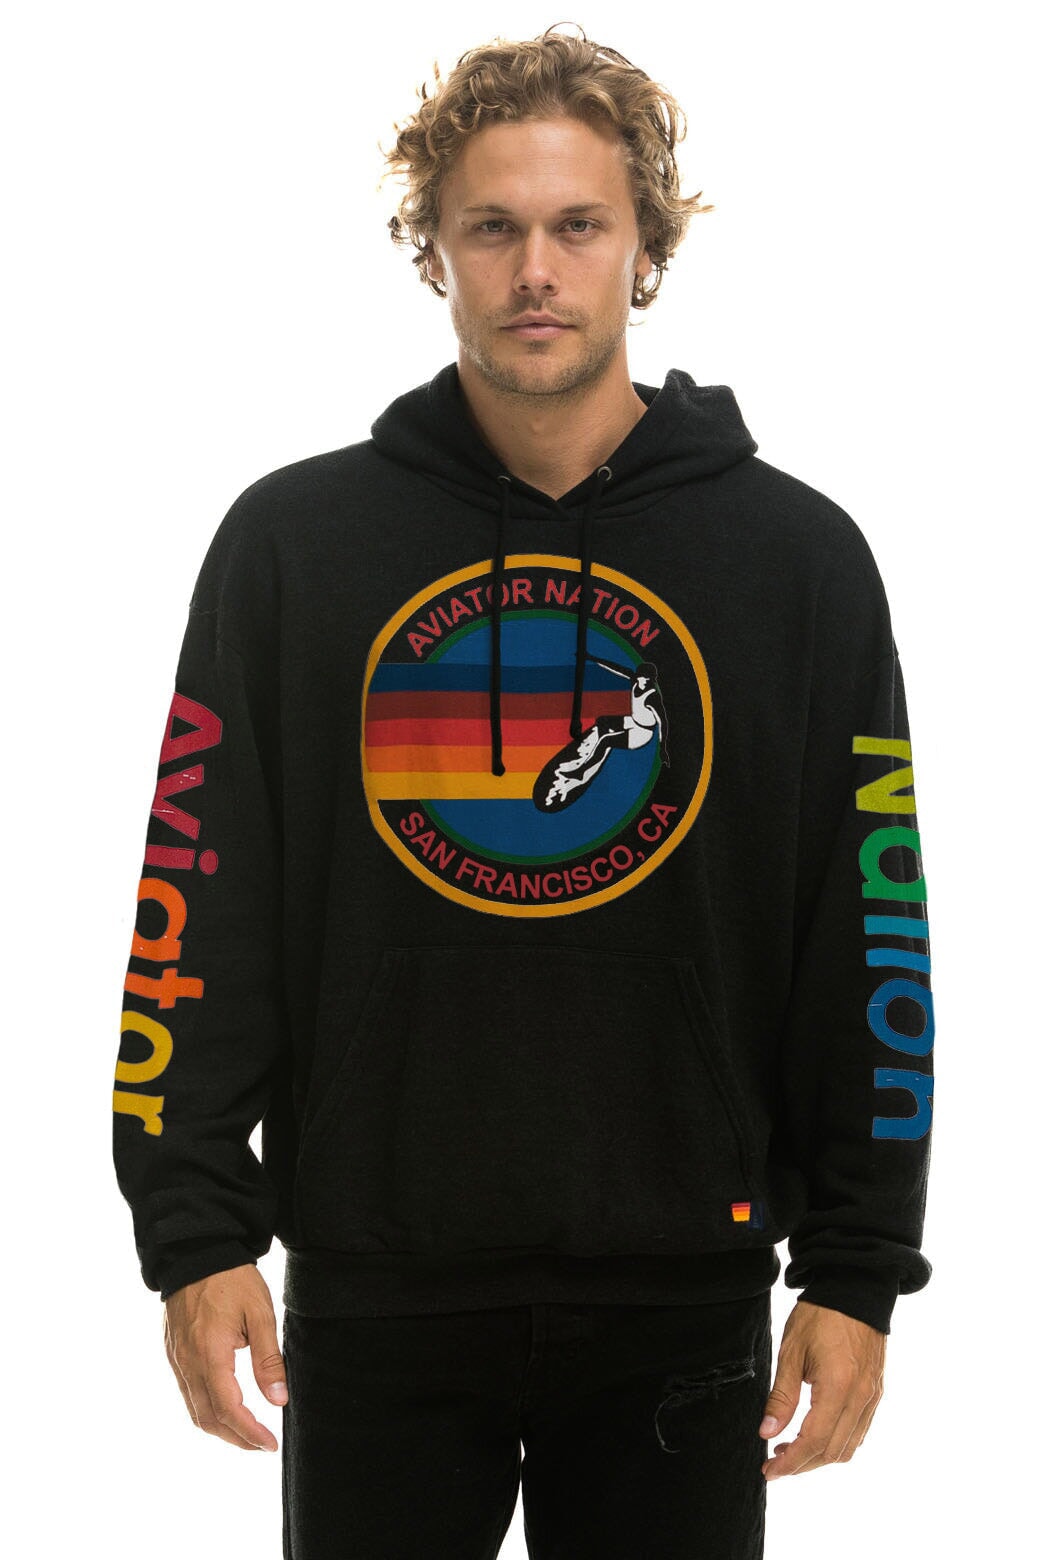 AVIATOR NATION SAN FRANCISCO RELAXED PULLOVER HOODIE - BLACK - Aviator  Nation